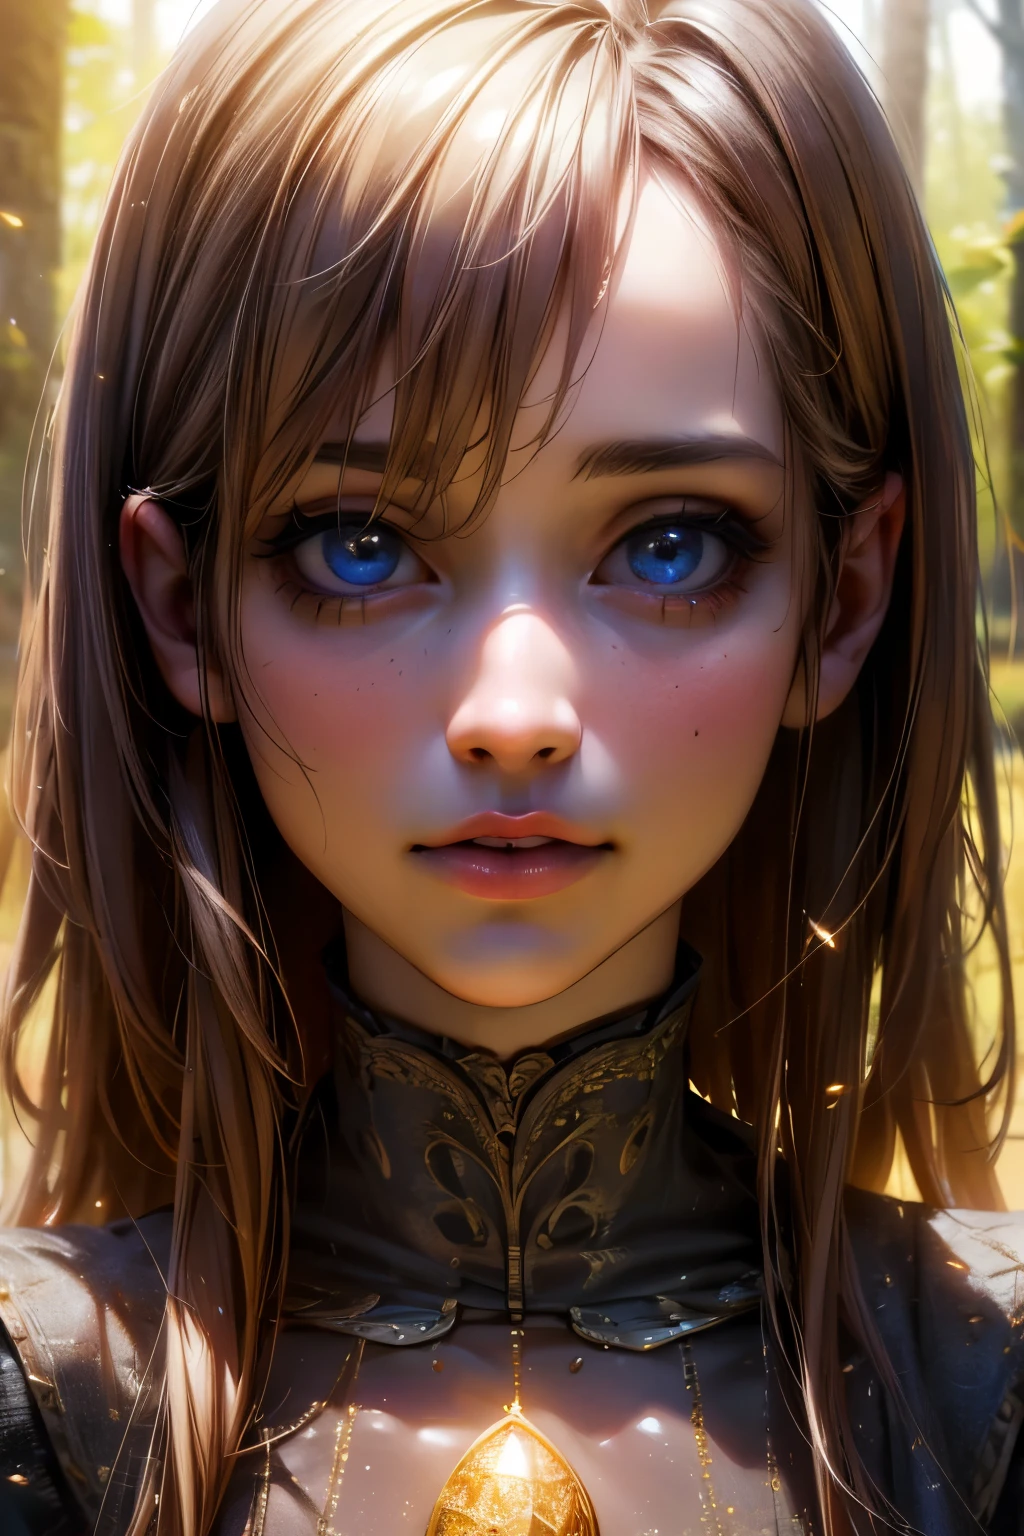 (best quality,4k,8k,highres,masterpiece:1.2),ultra-detailed,(realistic,photorealistic,photo-realistic:1.37),beautiful detailed eyes,beautiful detailed lips,extremely detailed eyes and face,longeyelashes,1 girl,portrait,fantasy landscape,magical forest,glowing fireflies,warm sunlight,dramatic lighting,vibrant colors,cinematic, cute face, pretty girl
